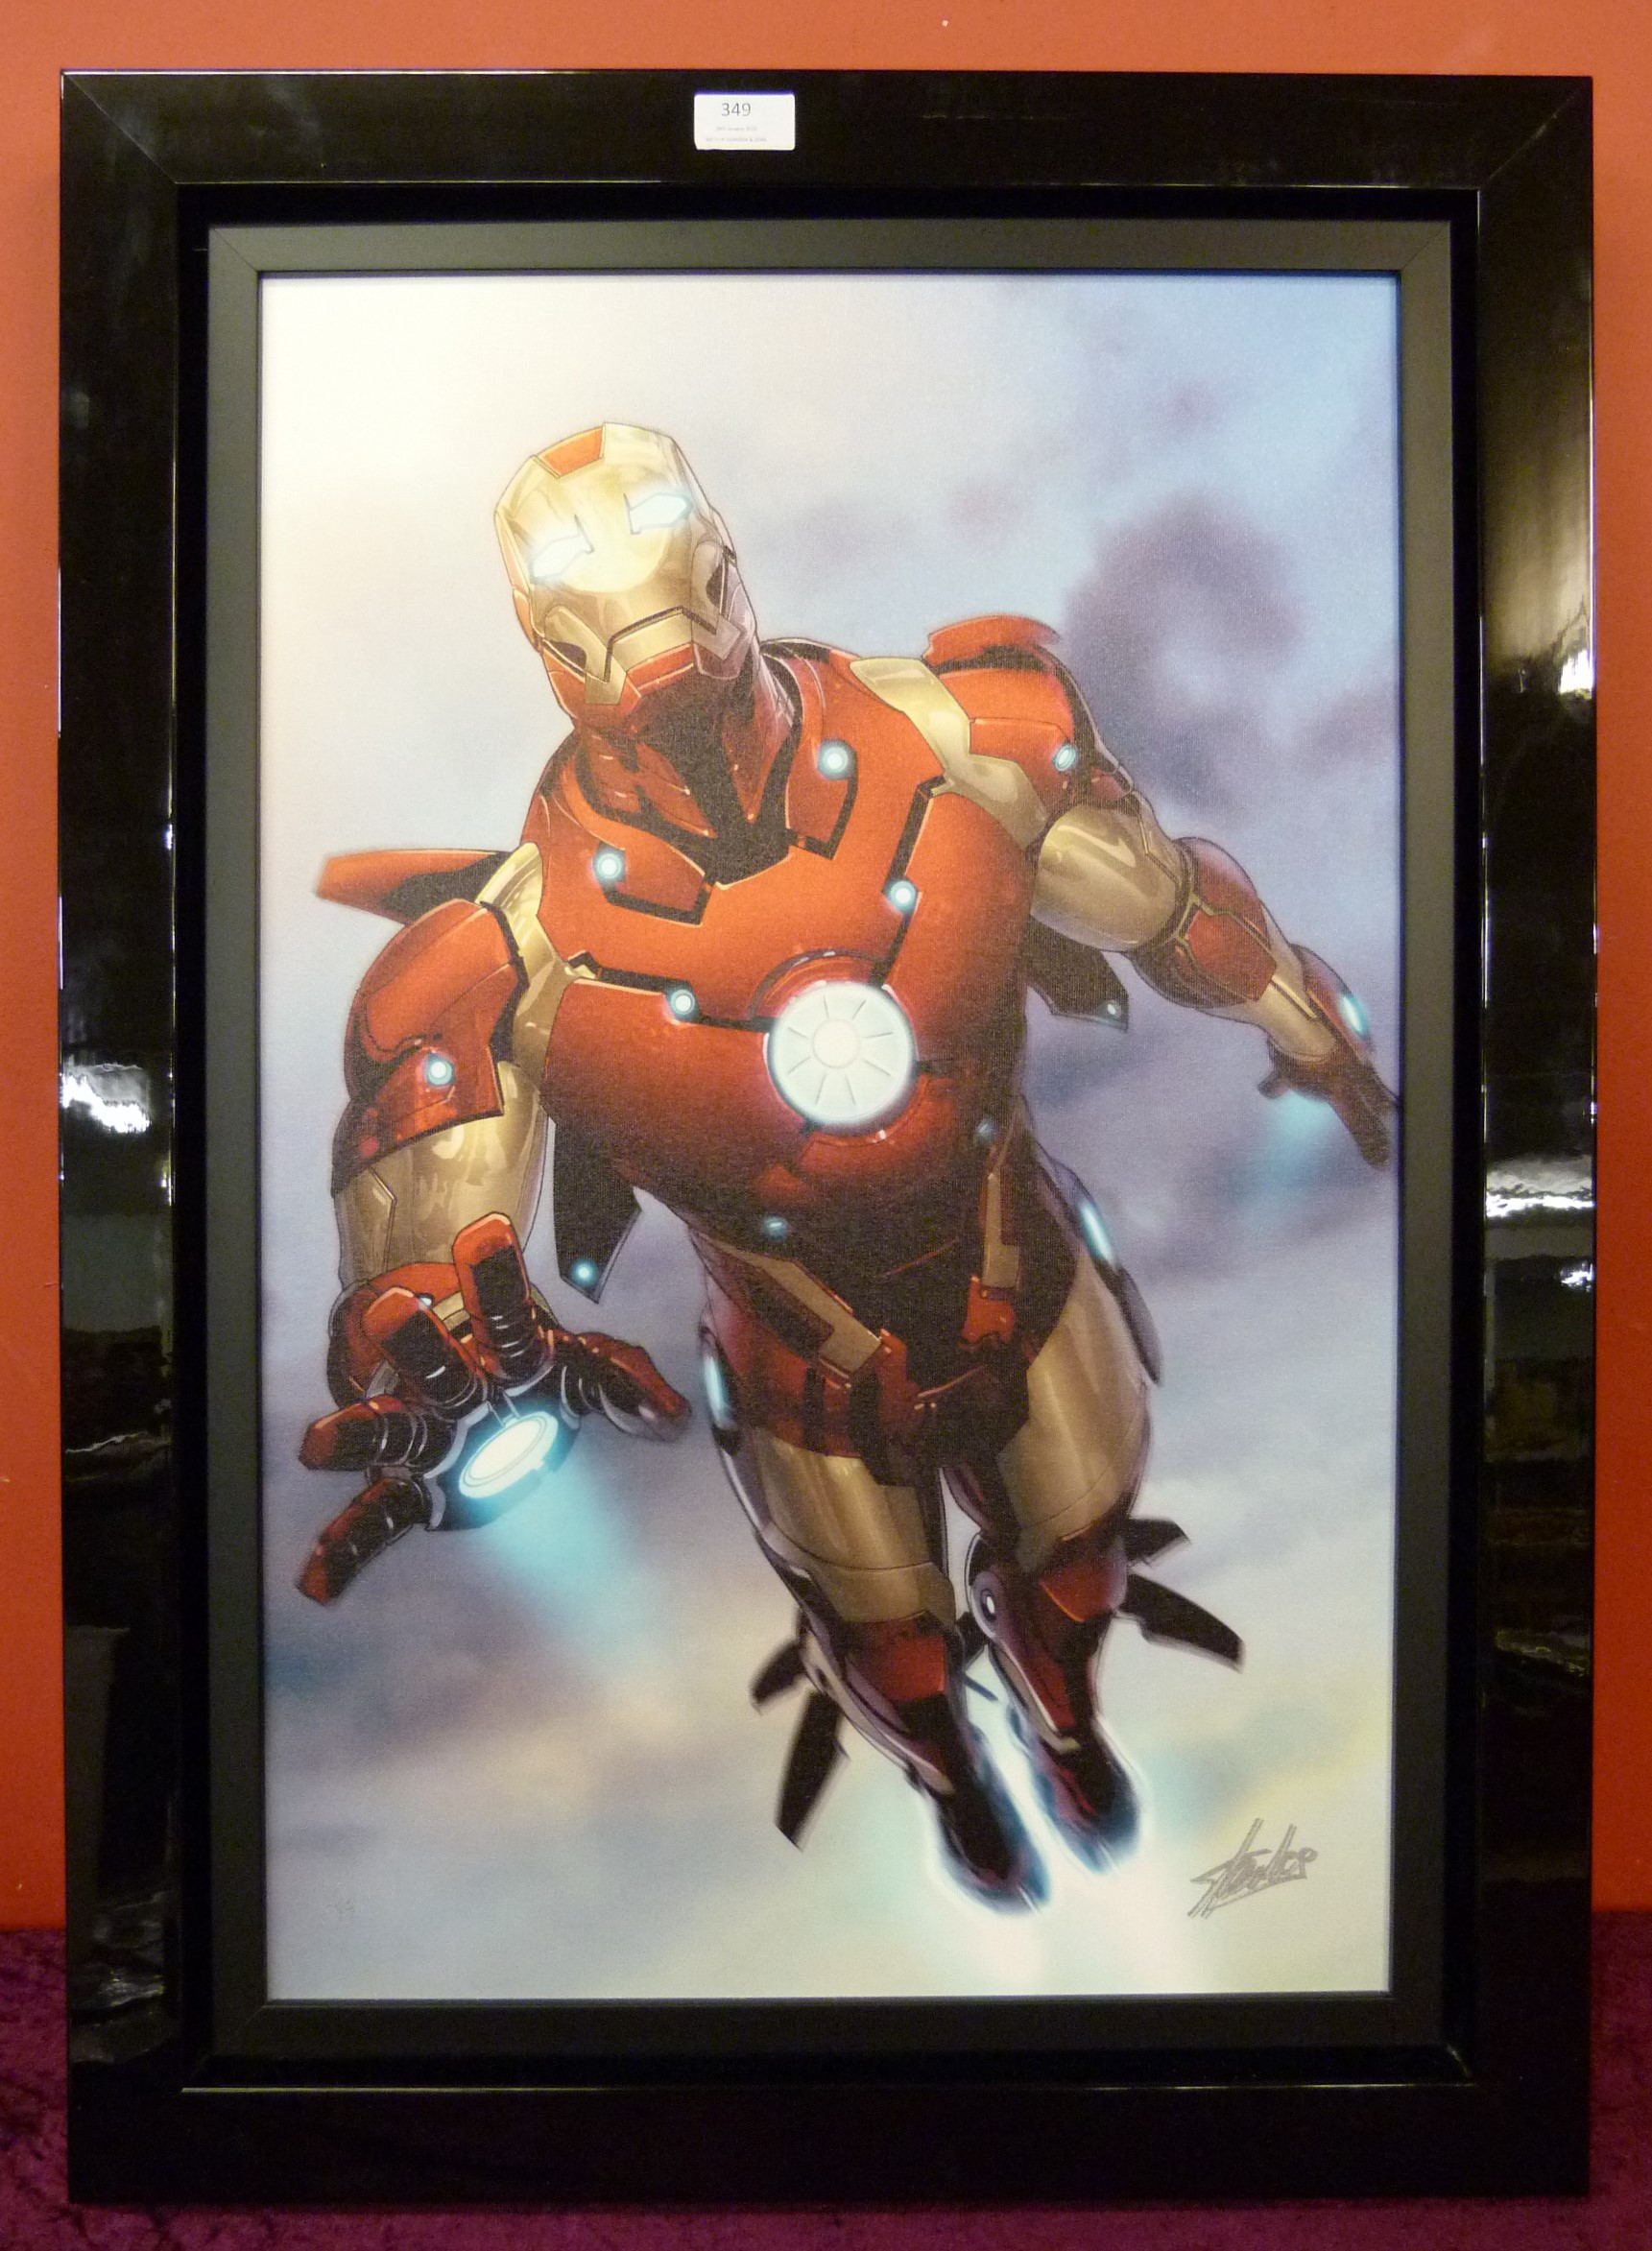 Stan Lee (American 1922-2018), Marvel Comics Invincible Iron Man, signed limited edition giclee - Image 2 of 6